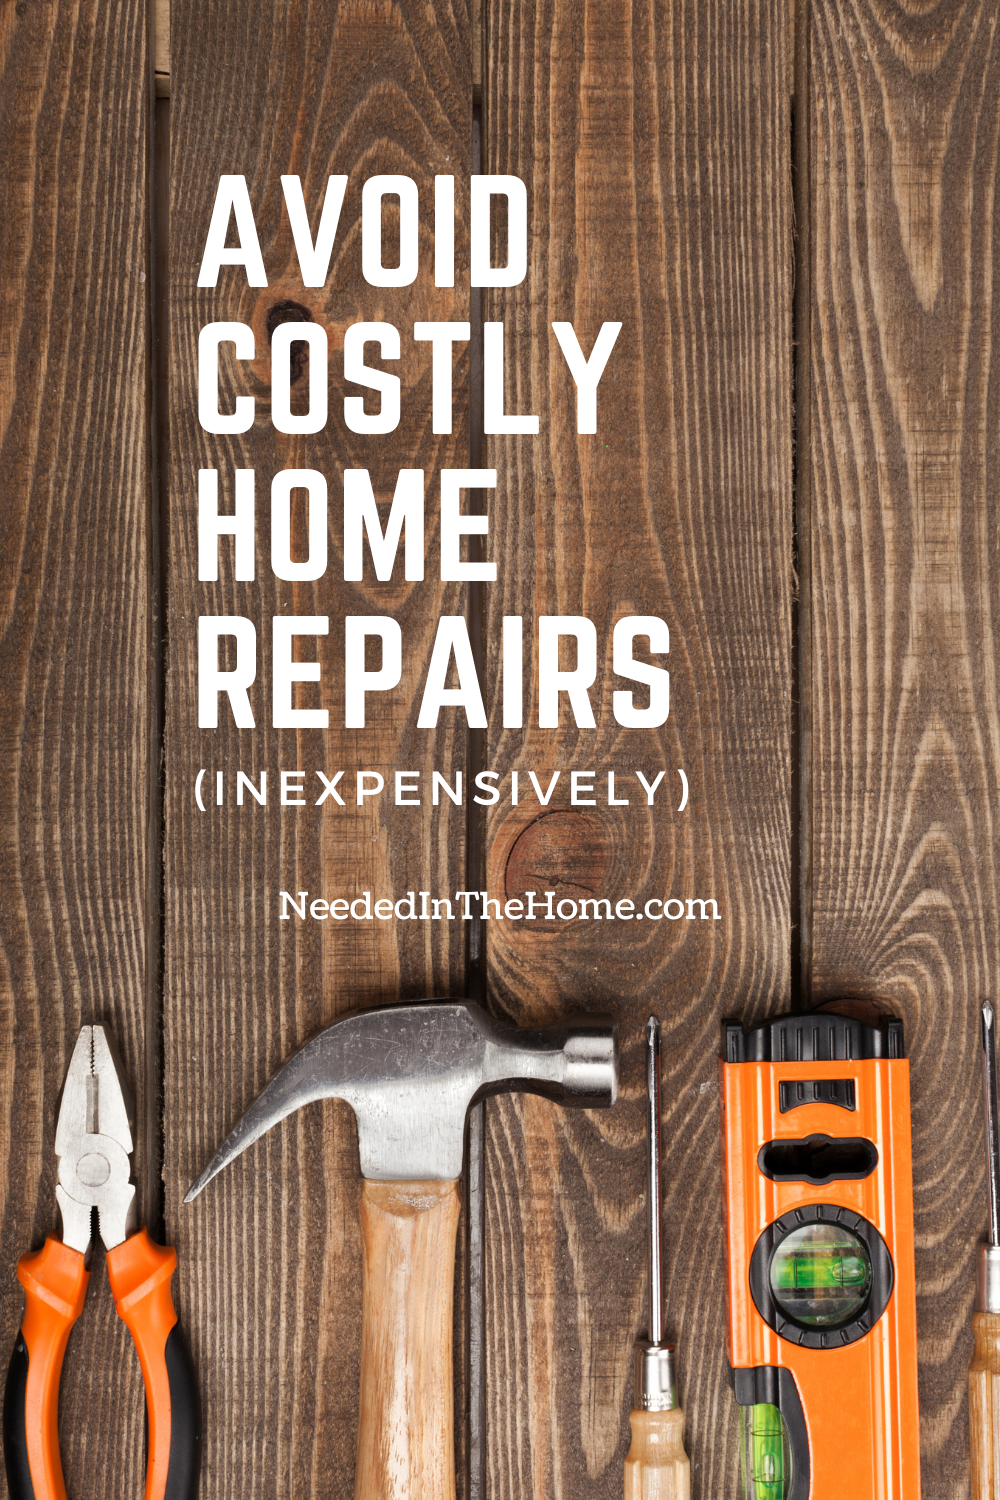 pinterest-pin-description Avoid Costly Home Repairs Inexpensively pliers hammer screwdrivers level wood planking neededinthehome